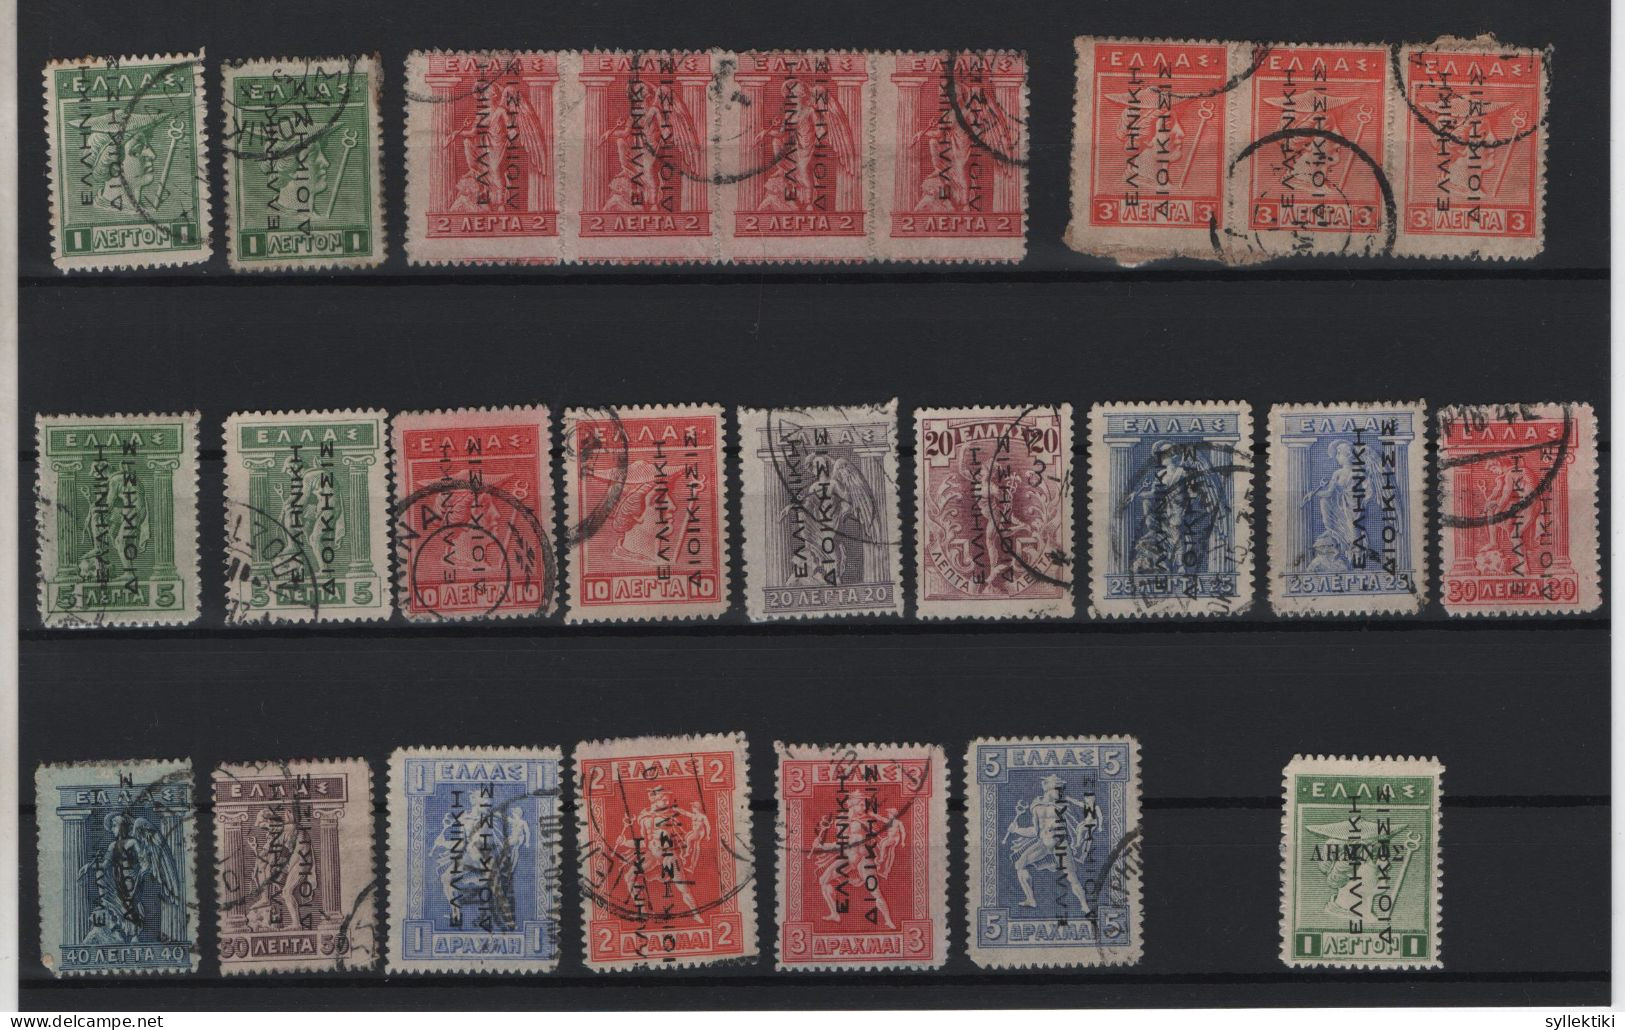 GREECE 1913 GREEK ADMIN READING UP 1 LEPTON - 5 DRACHMAS USED STAMPS (ONE IS MH)   HELLAS No 229 - 248 AND VALUE EURO 16 - Used Stamps